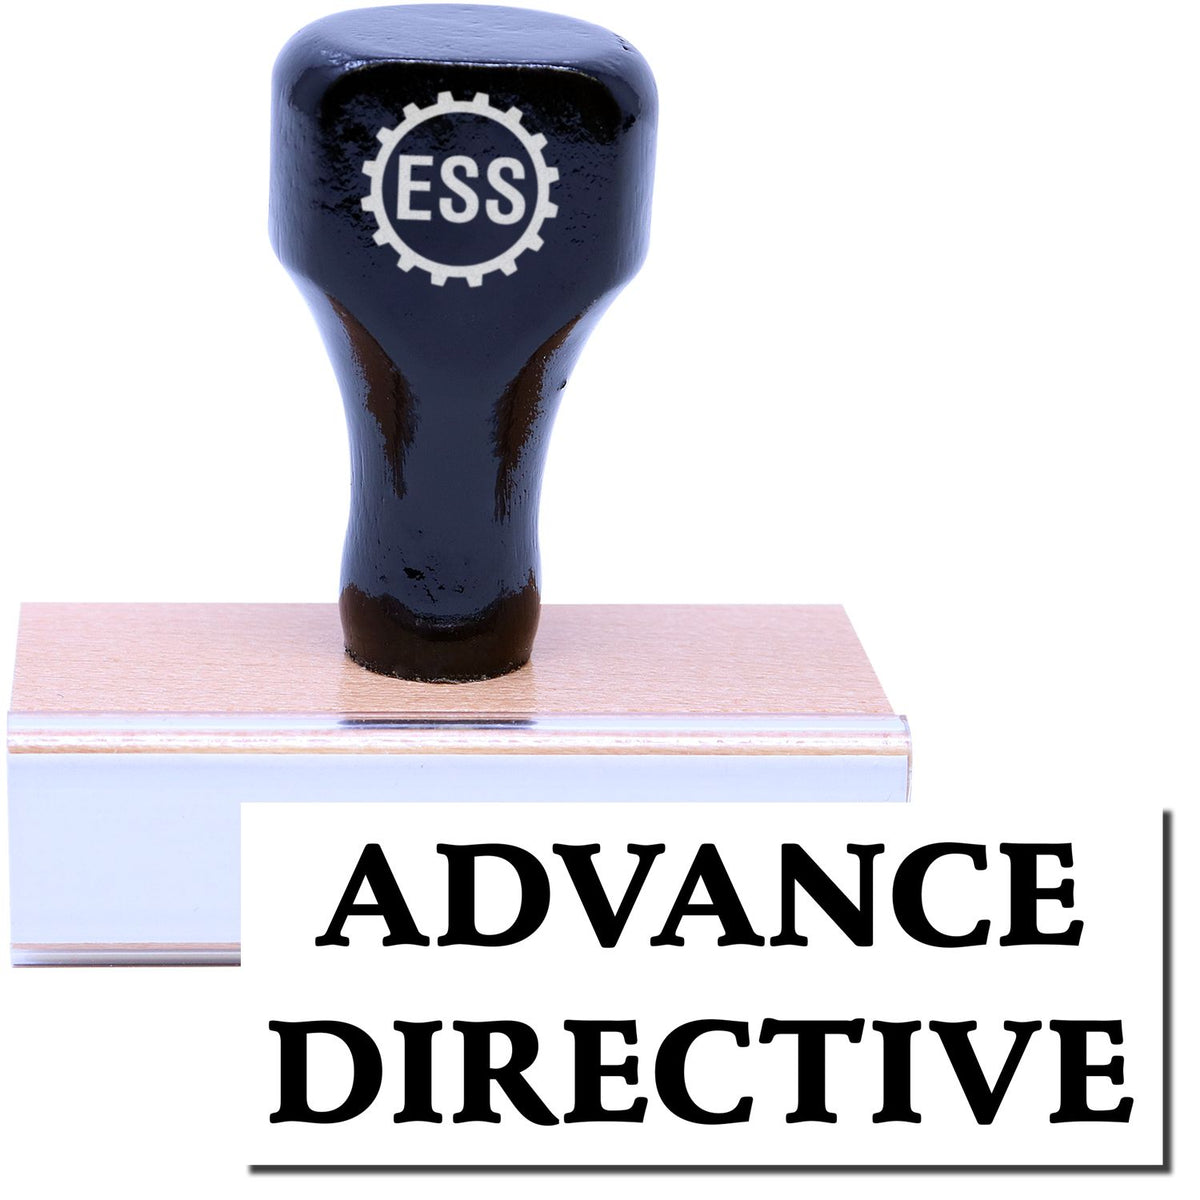 A stock office rubber stamp with a stamped image showing how the text &quot;ADVANCE DIRECTIVE&quot; is displayed after stamping.